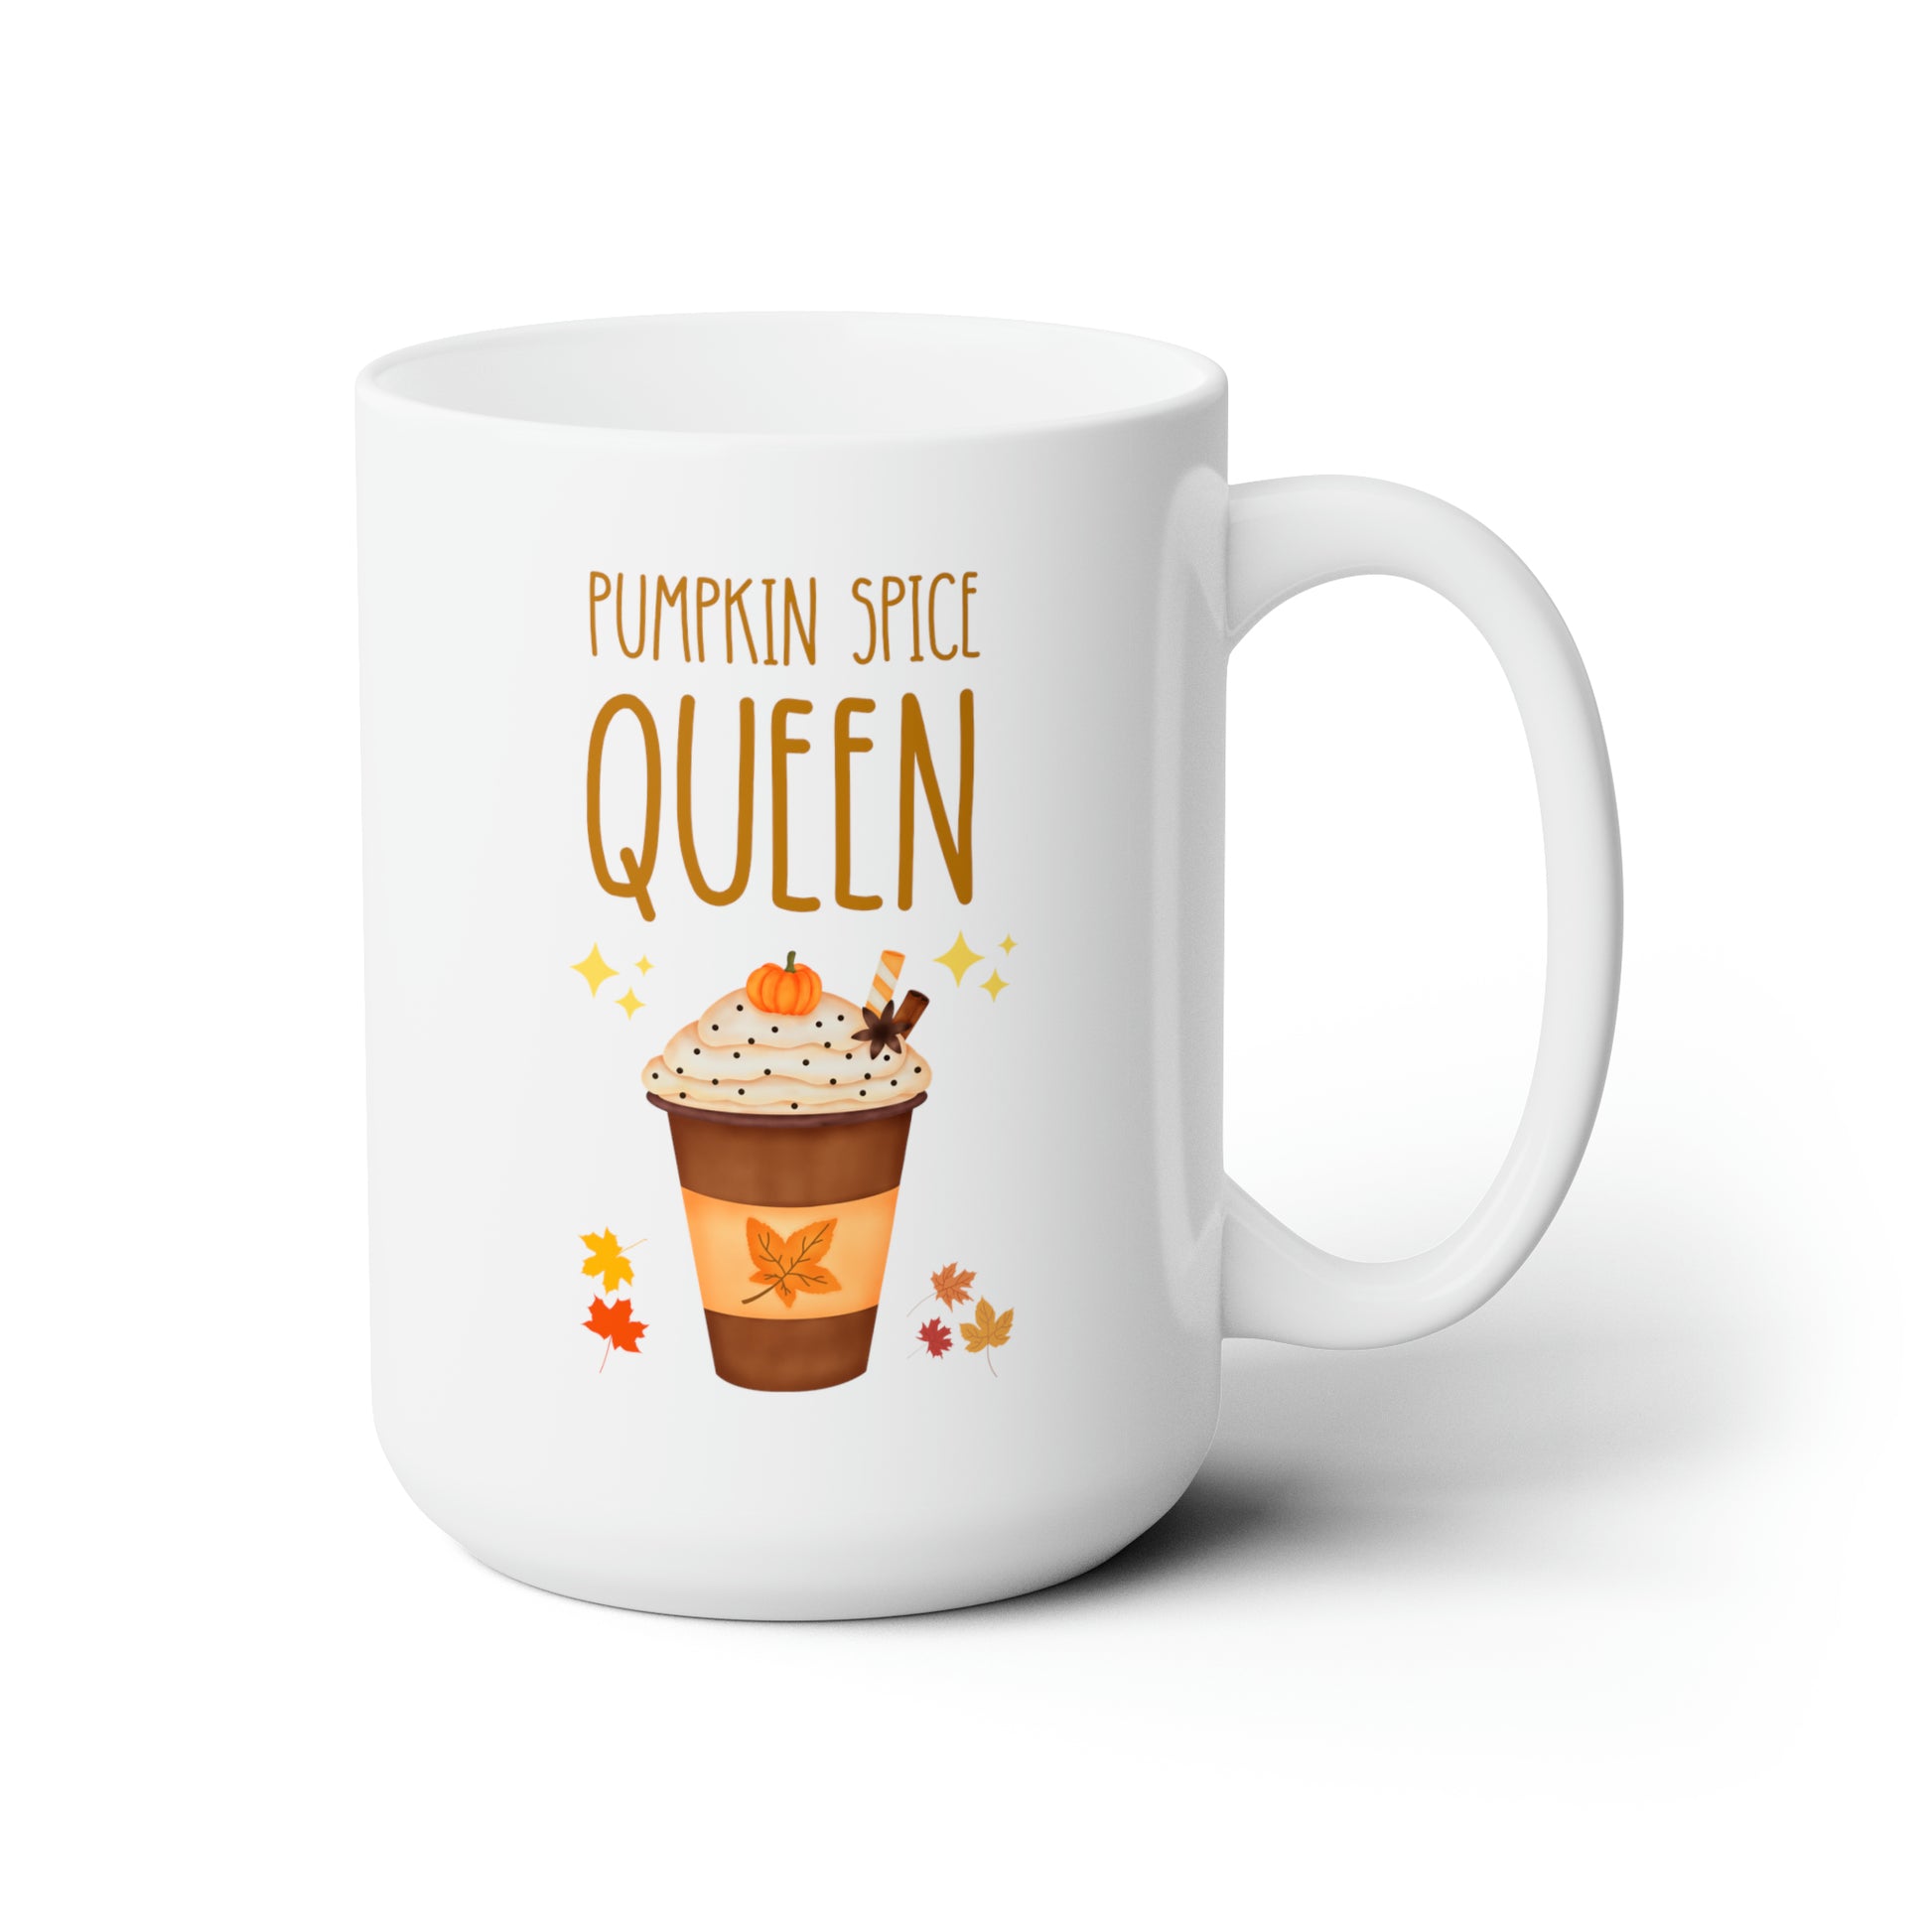 Pumpkin Spice Queen 15oz white funny large coffee mug gift for latte lover halloween decoration autumn fall thanksgiving waveywares wavey wares wavywares wavy wares